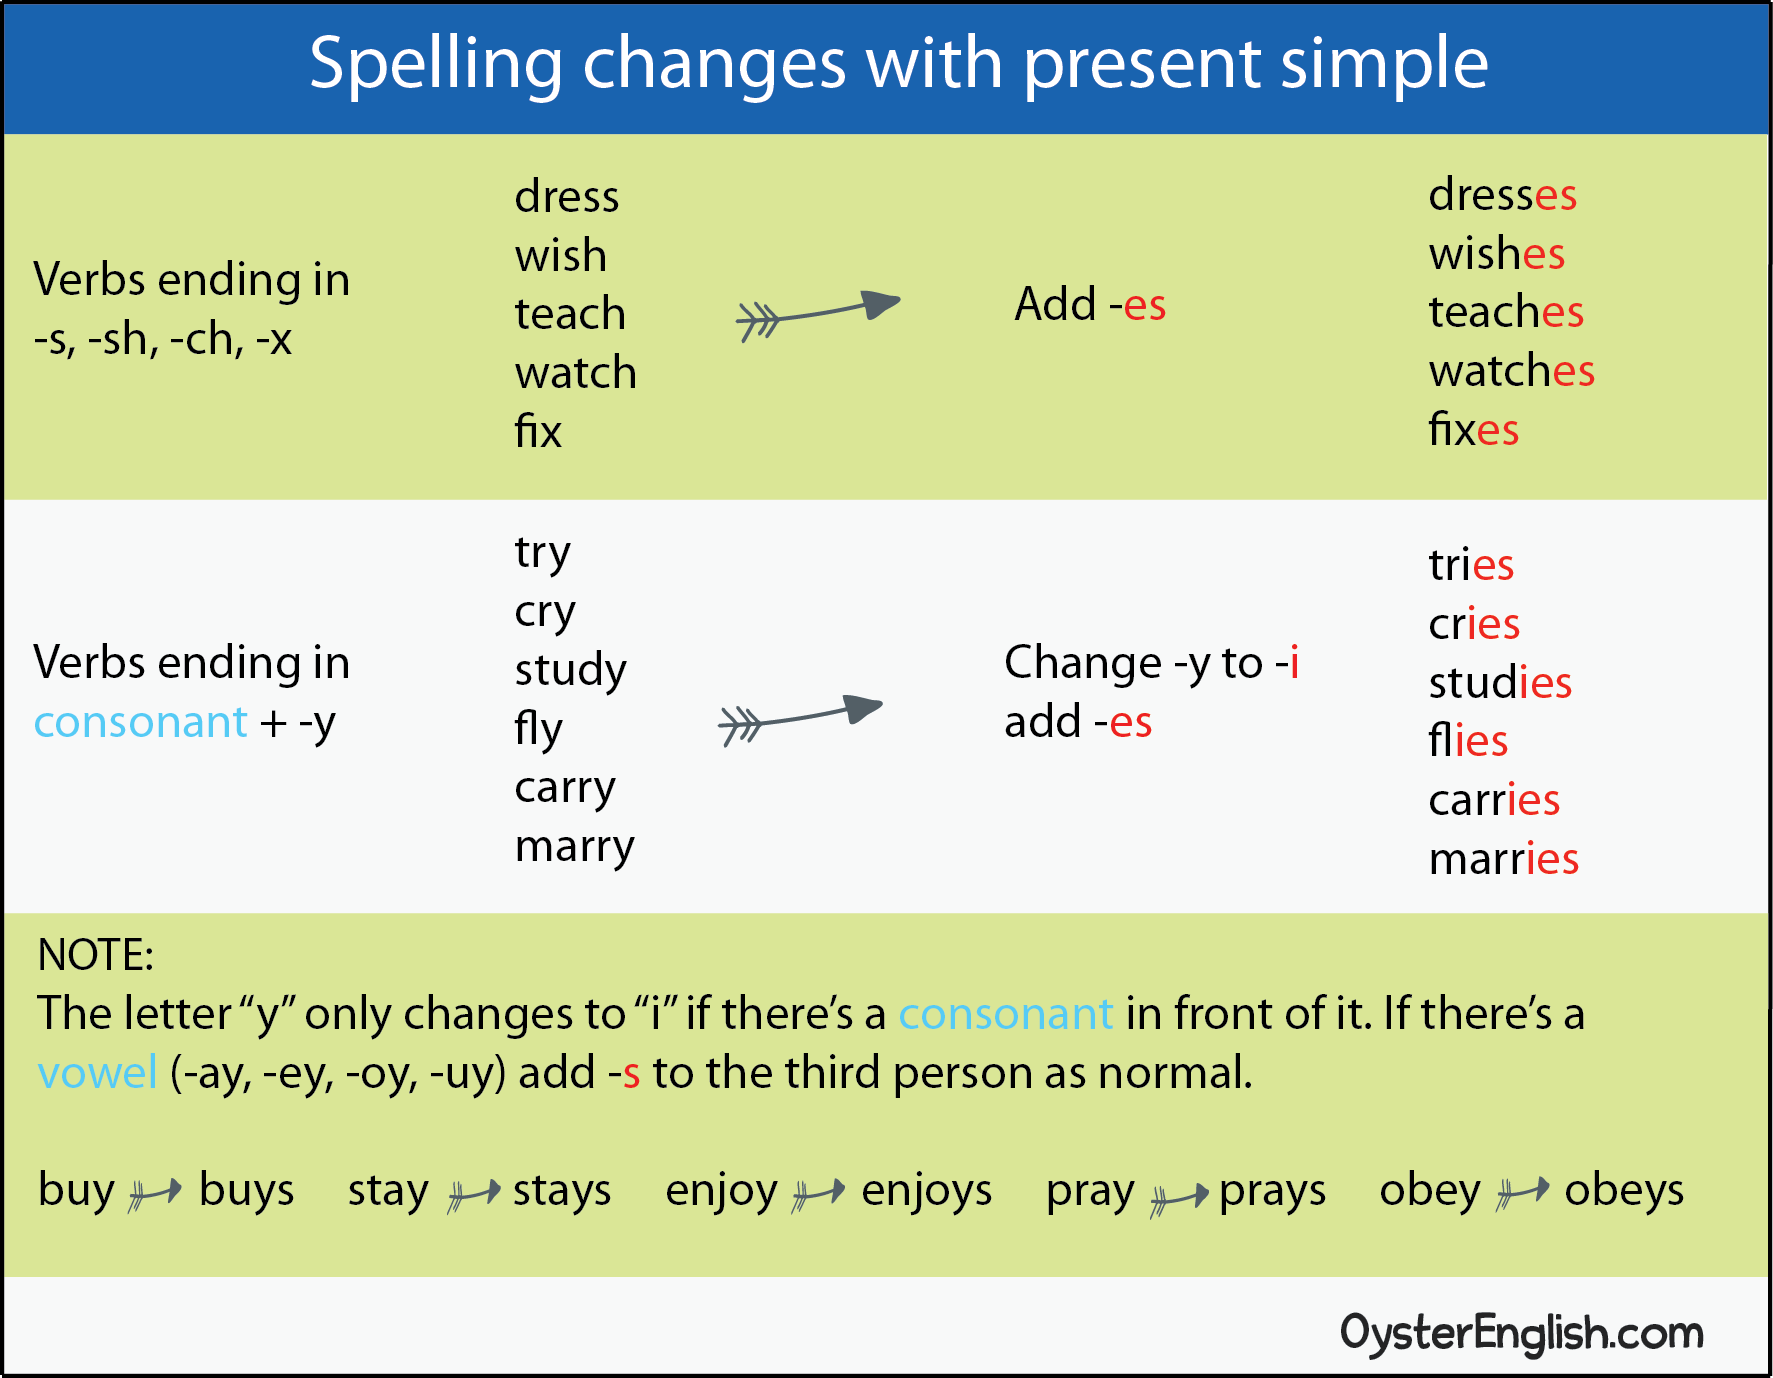 change-the-verbs-to-present-tense-form-answer-verb-worksheets-simple